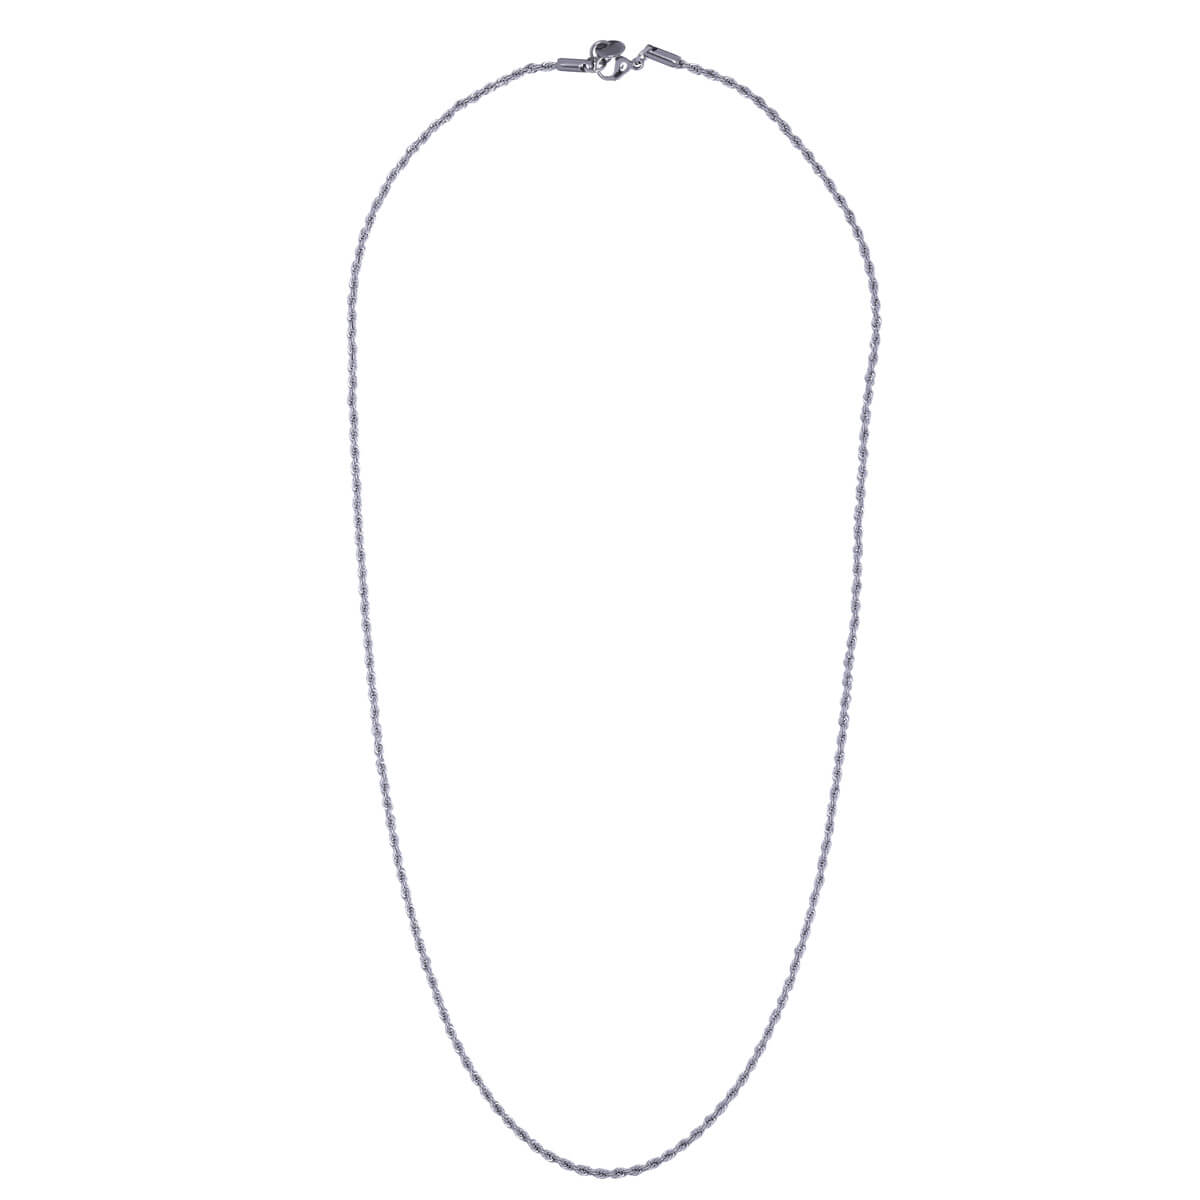 Thin steel necklace cordell 55cm (steel 316L)